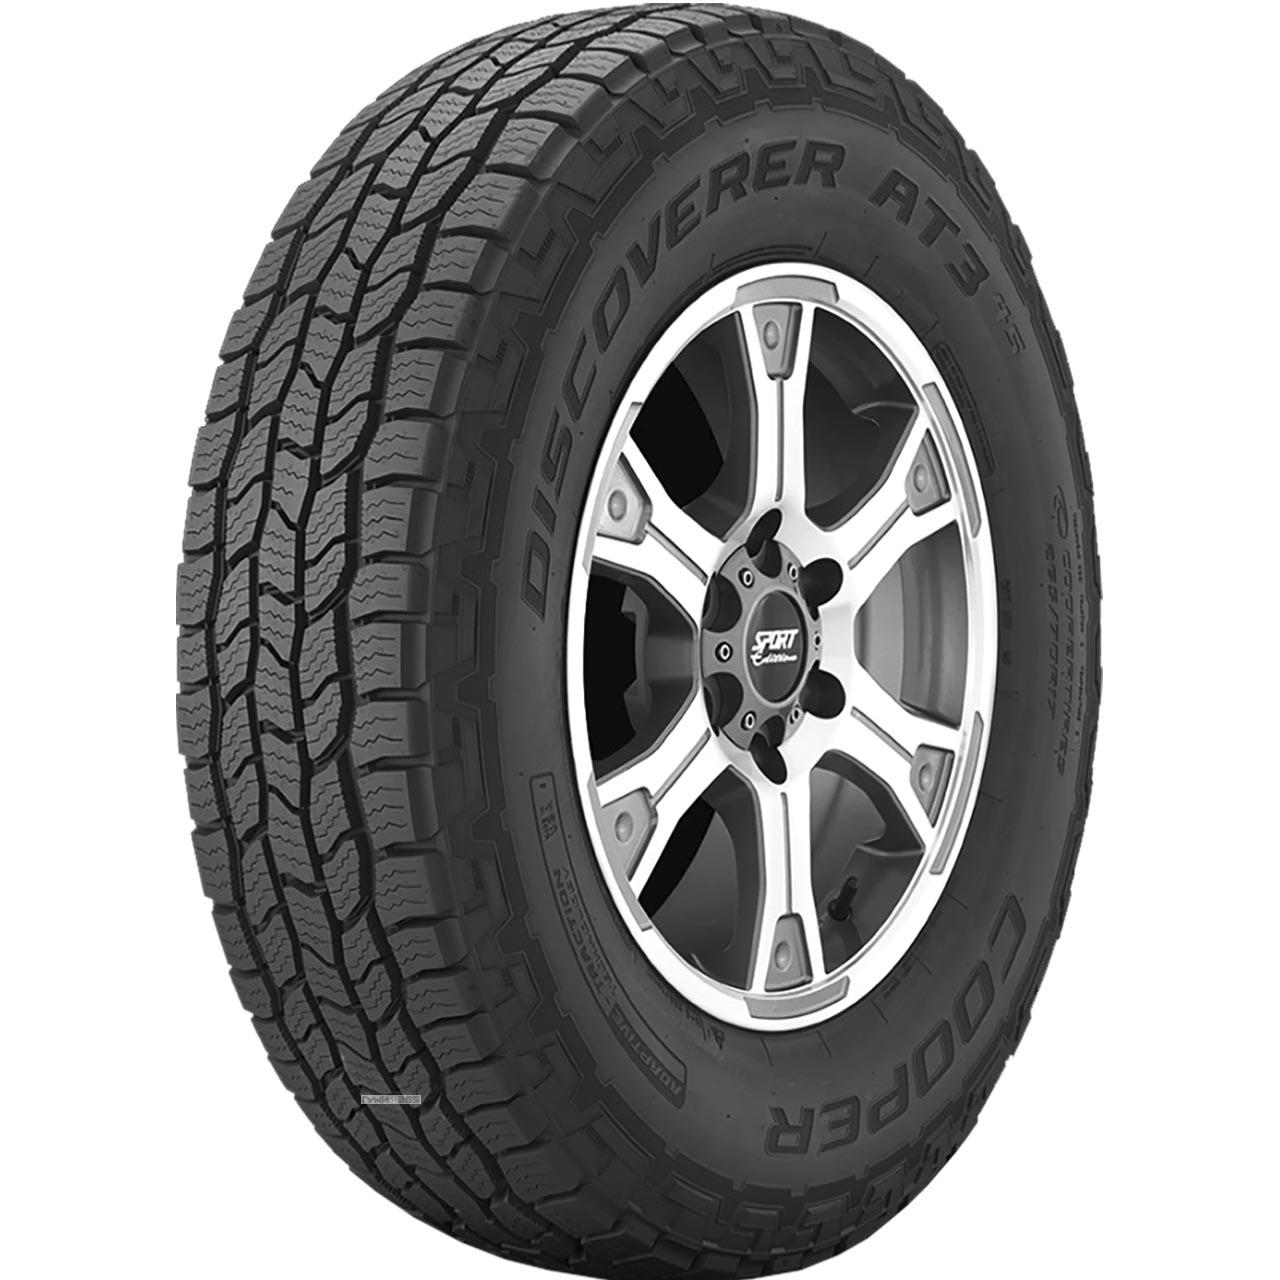 discoverer-at3-4s-xl-235-65r17-108t-tl-cooper-365